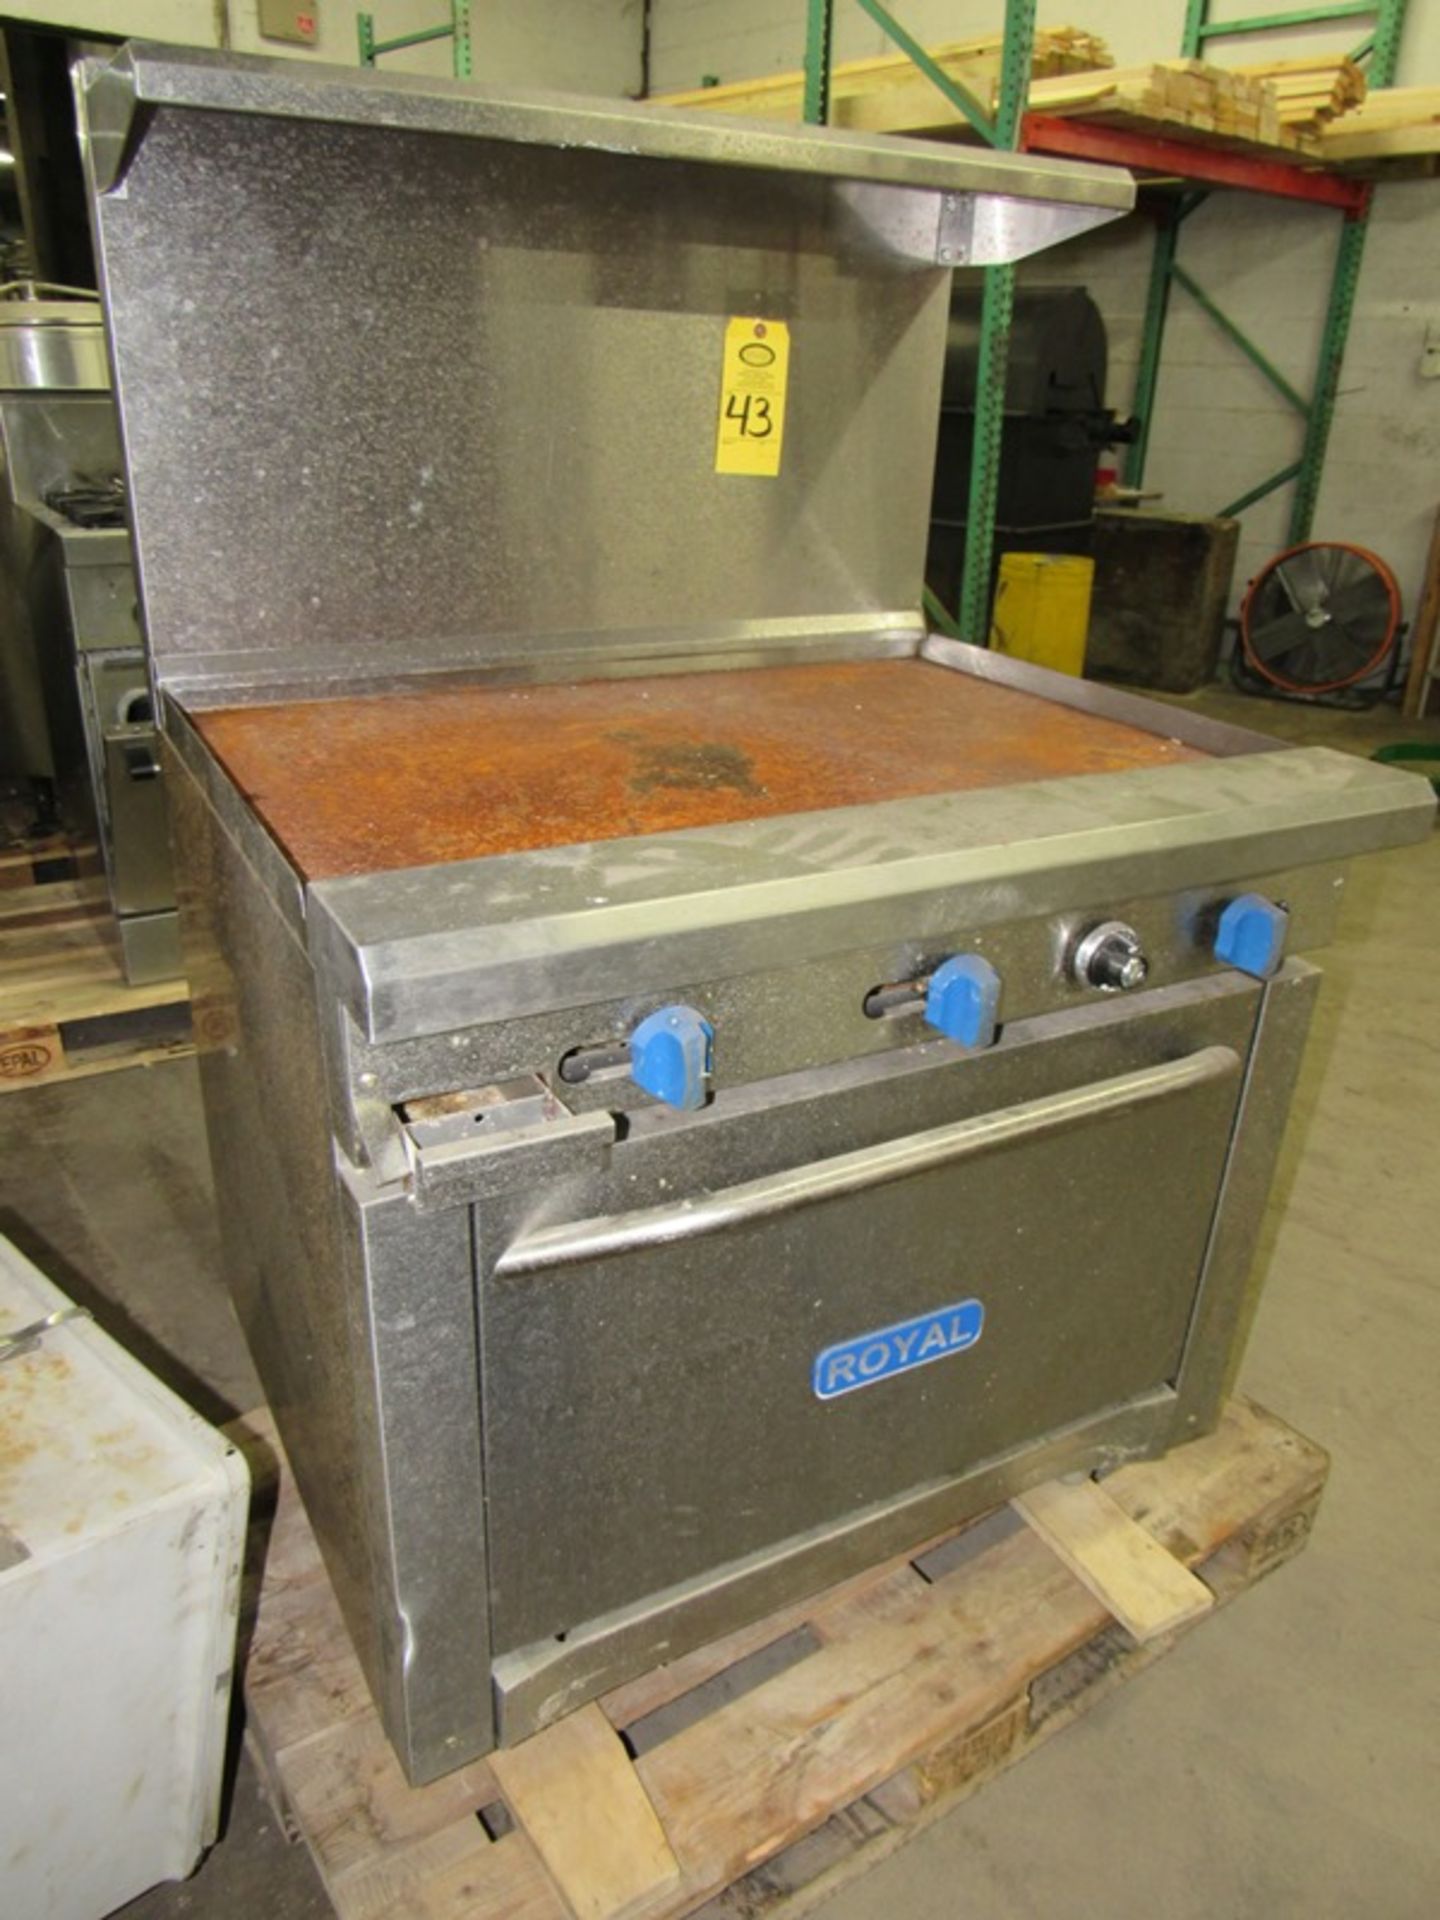 Royal Gas Fired Grill/Oven, 36" Wide X 21" Deep grill area ***All Monies must be received by Friday